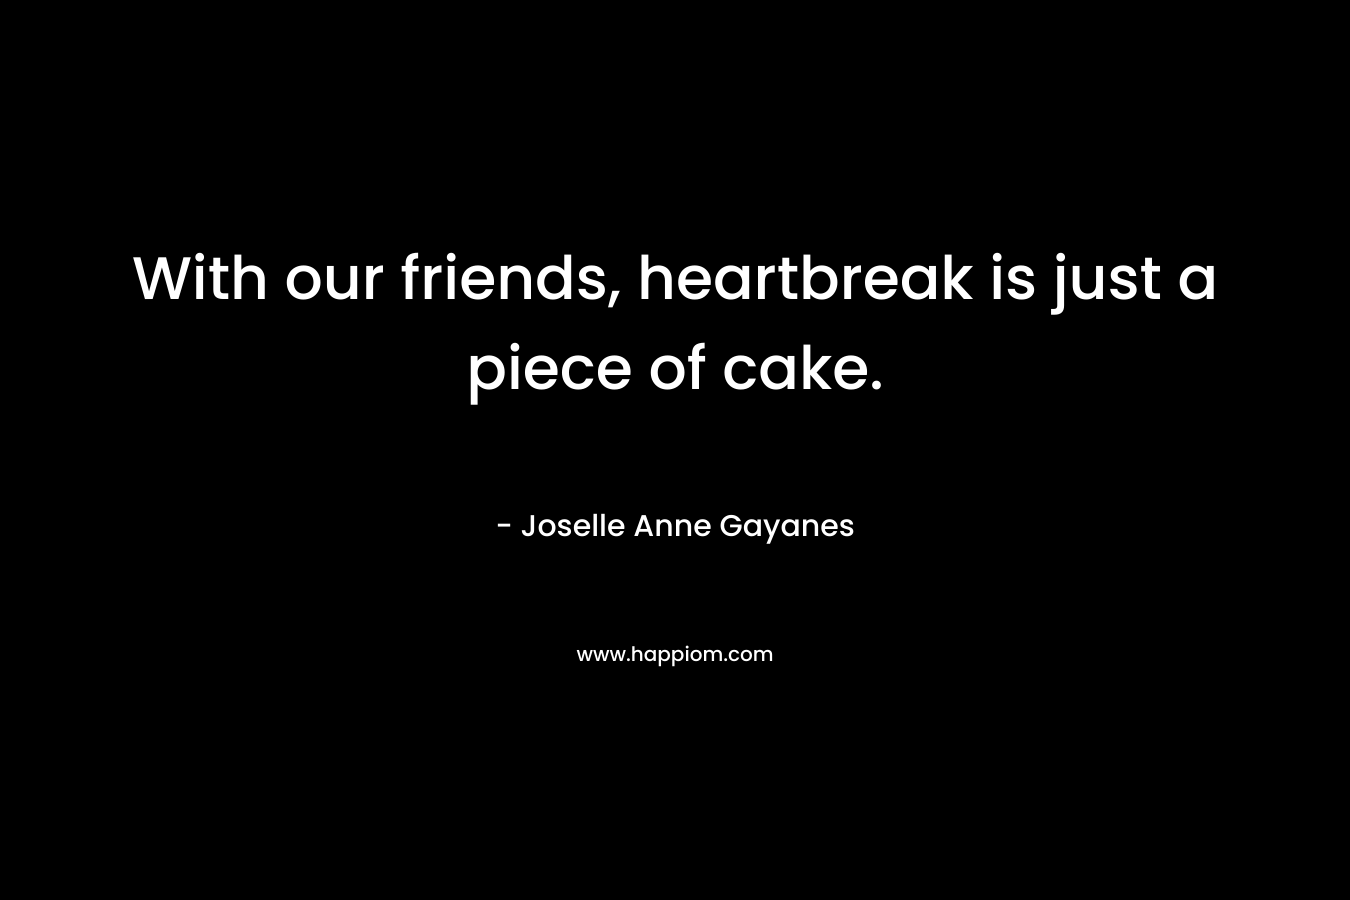 With our friends, heartbreak is just a piece of cake.